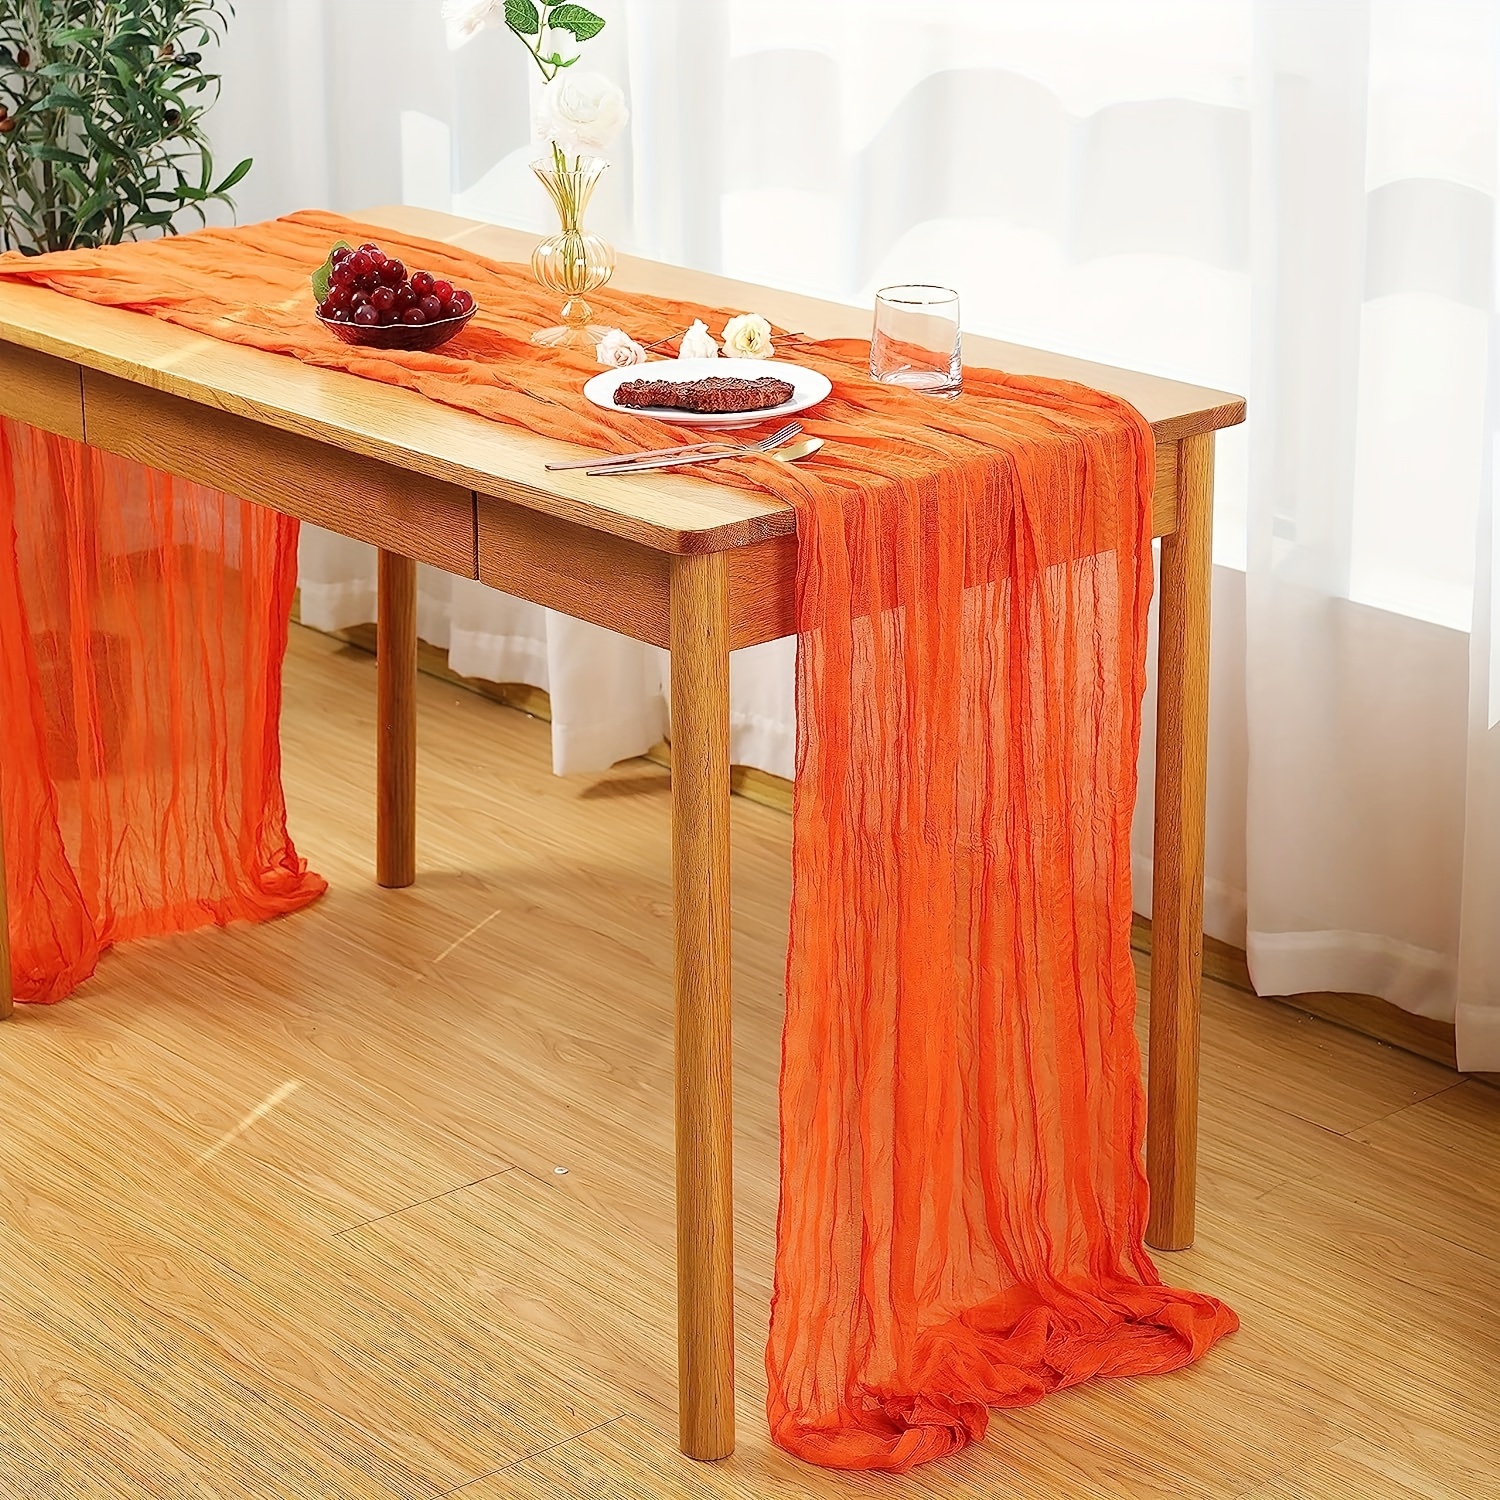 

1pc, Polyester Table Runner, Cheesecloth Table Runner, Rustic Gauze Fabric Boho Table Runner, Orange Cheesecloth Wedding Table Decor, For Party Bridal Shower Thanksgiving Halloween Table Decor